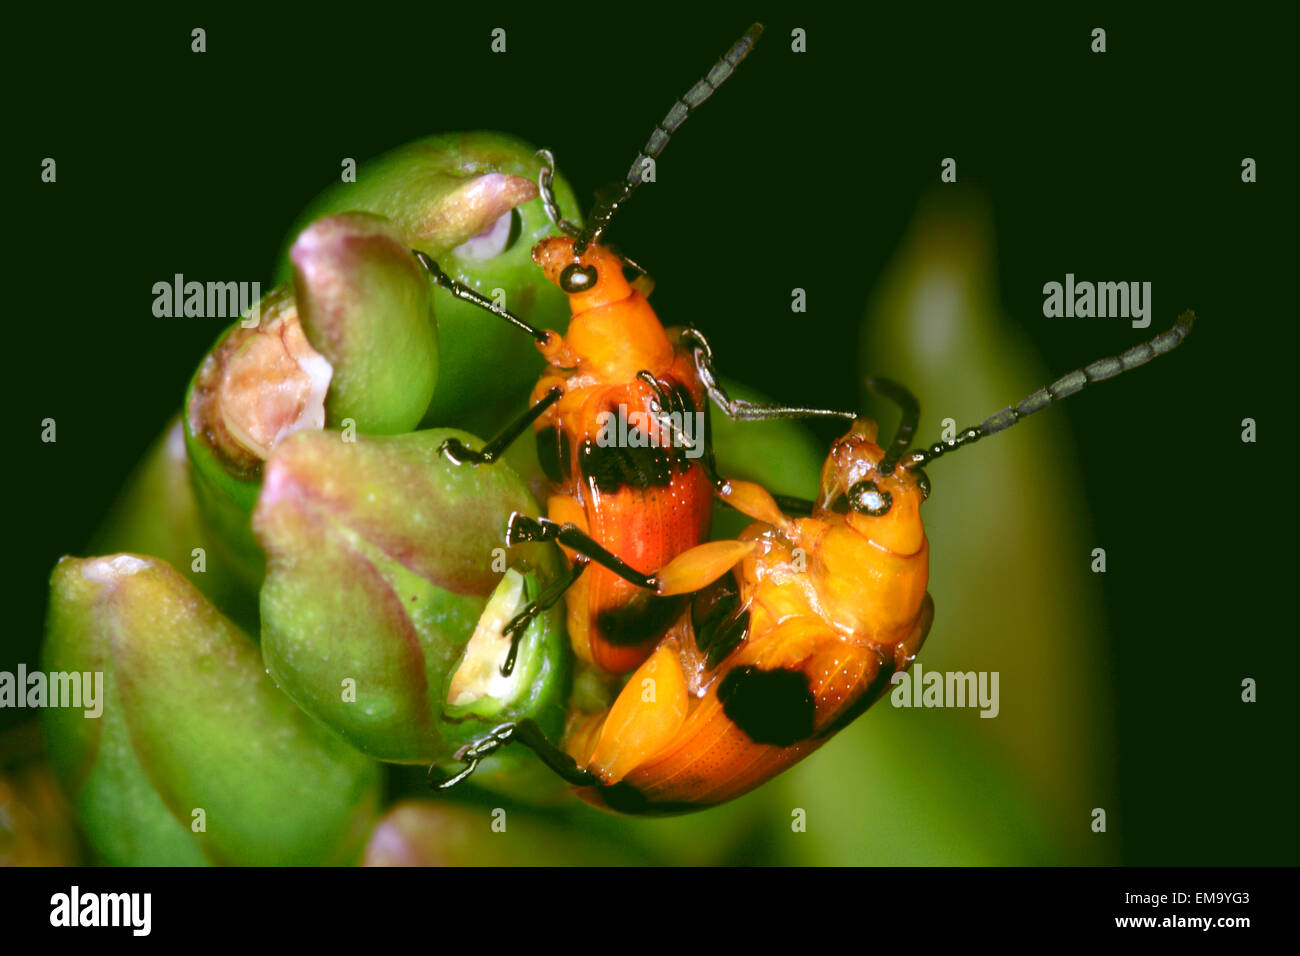 Mating Dendrobium Beetles, Stethopachys formosa. Size approximately 6mm. Stock Photo